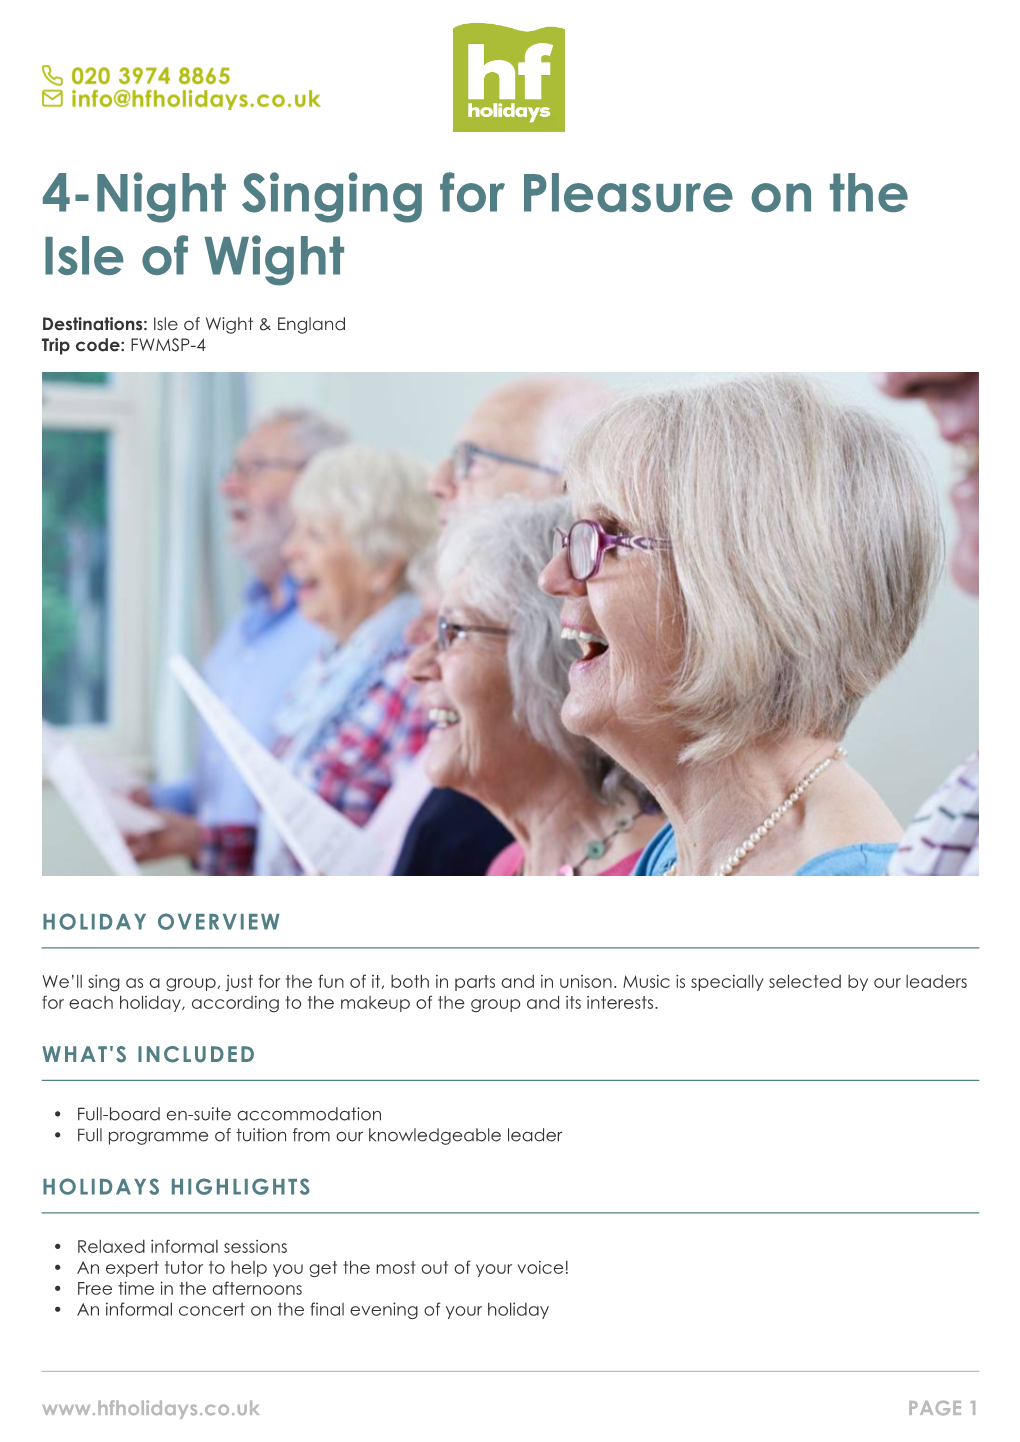 4-Night Singing for Pleasure on the Isle of Wight